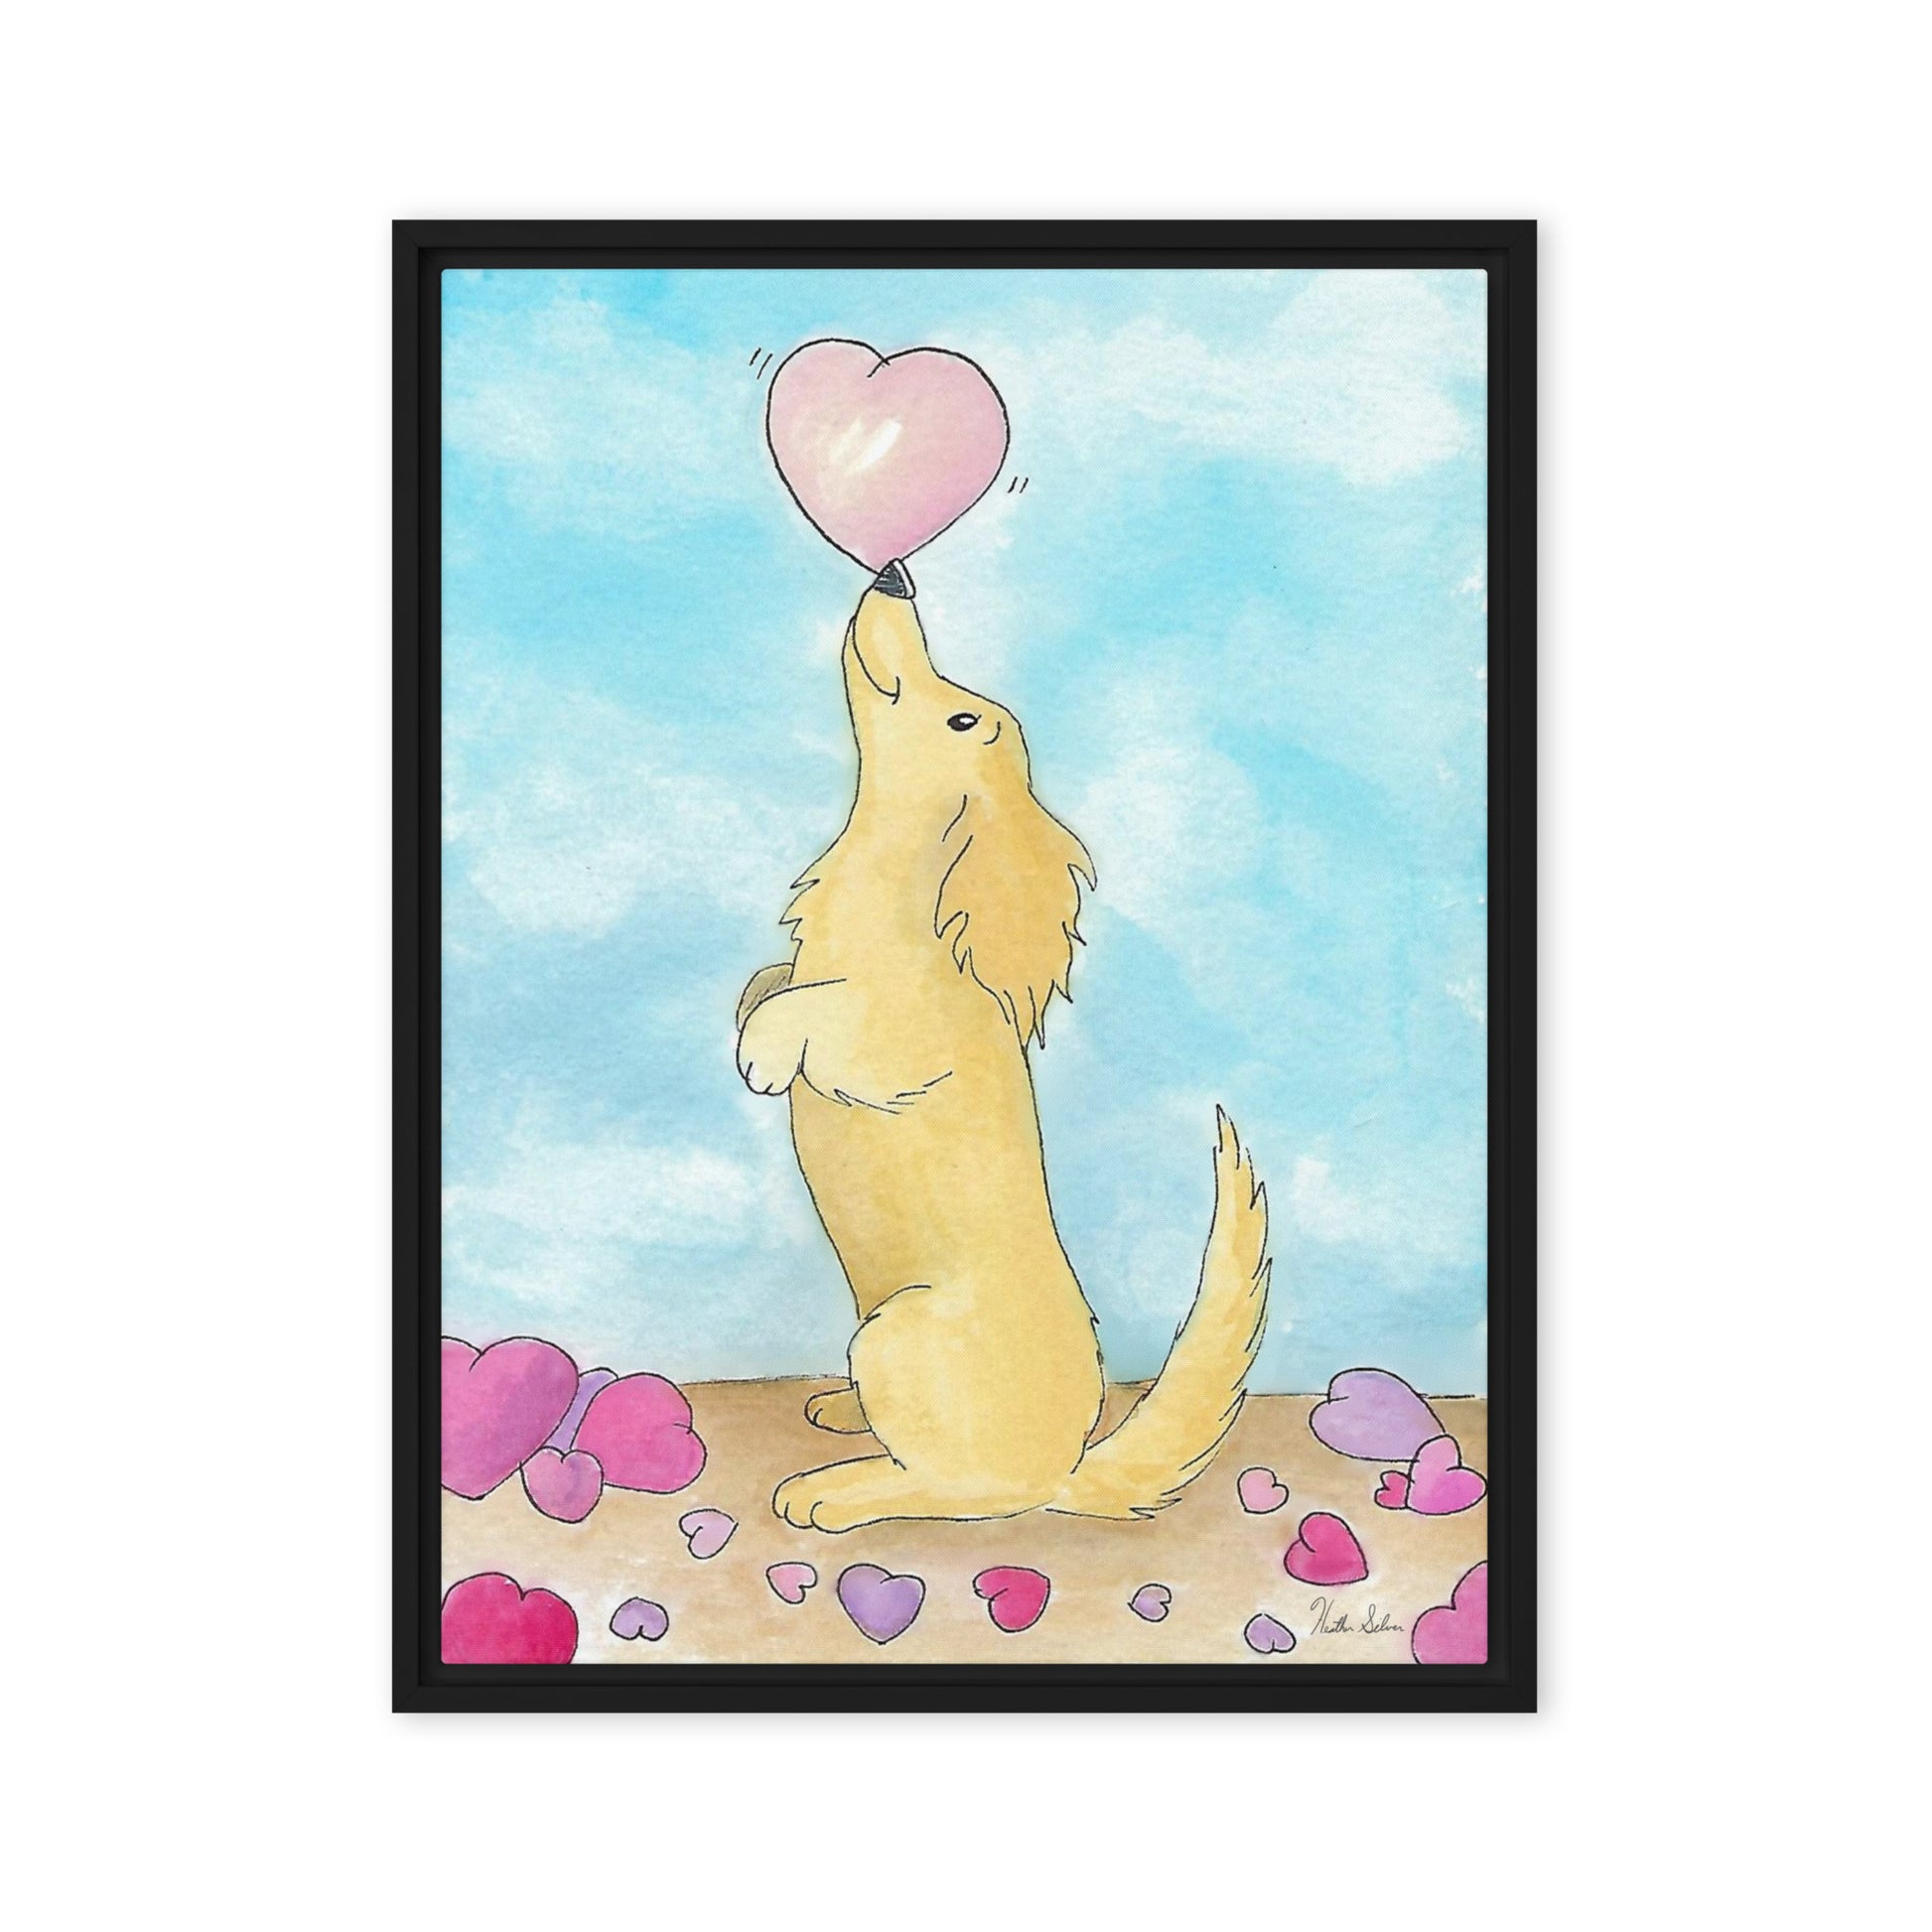 18 by 24 inch framed canvas Puppy Love print. The canvas is in a black pine wood frame.